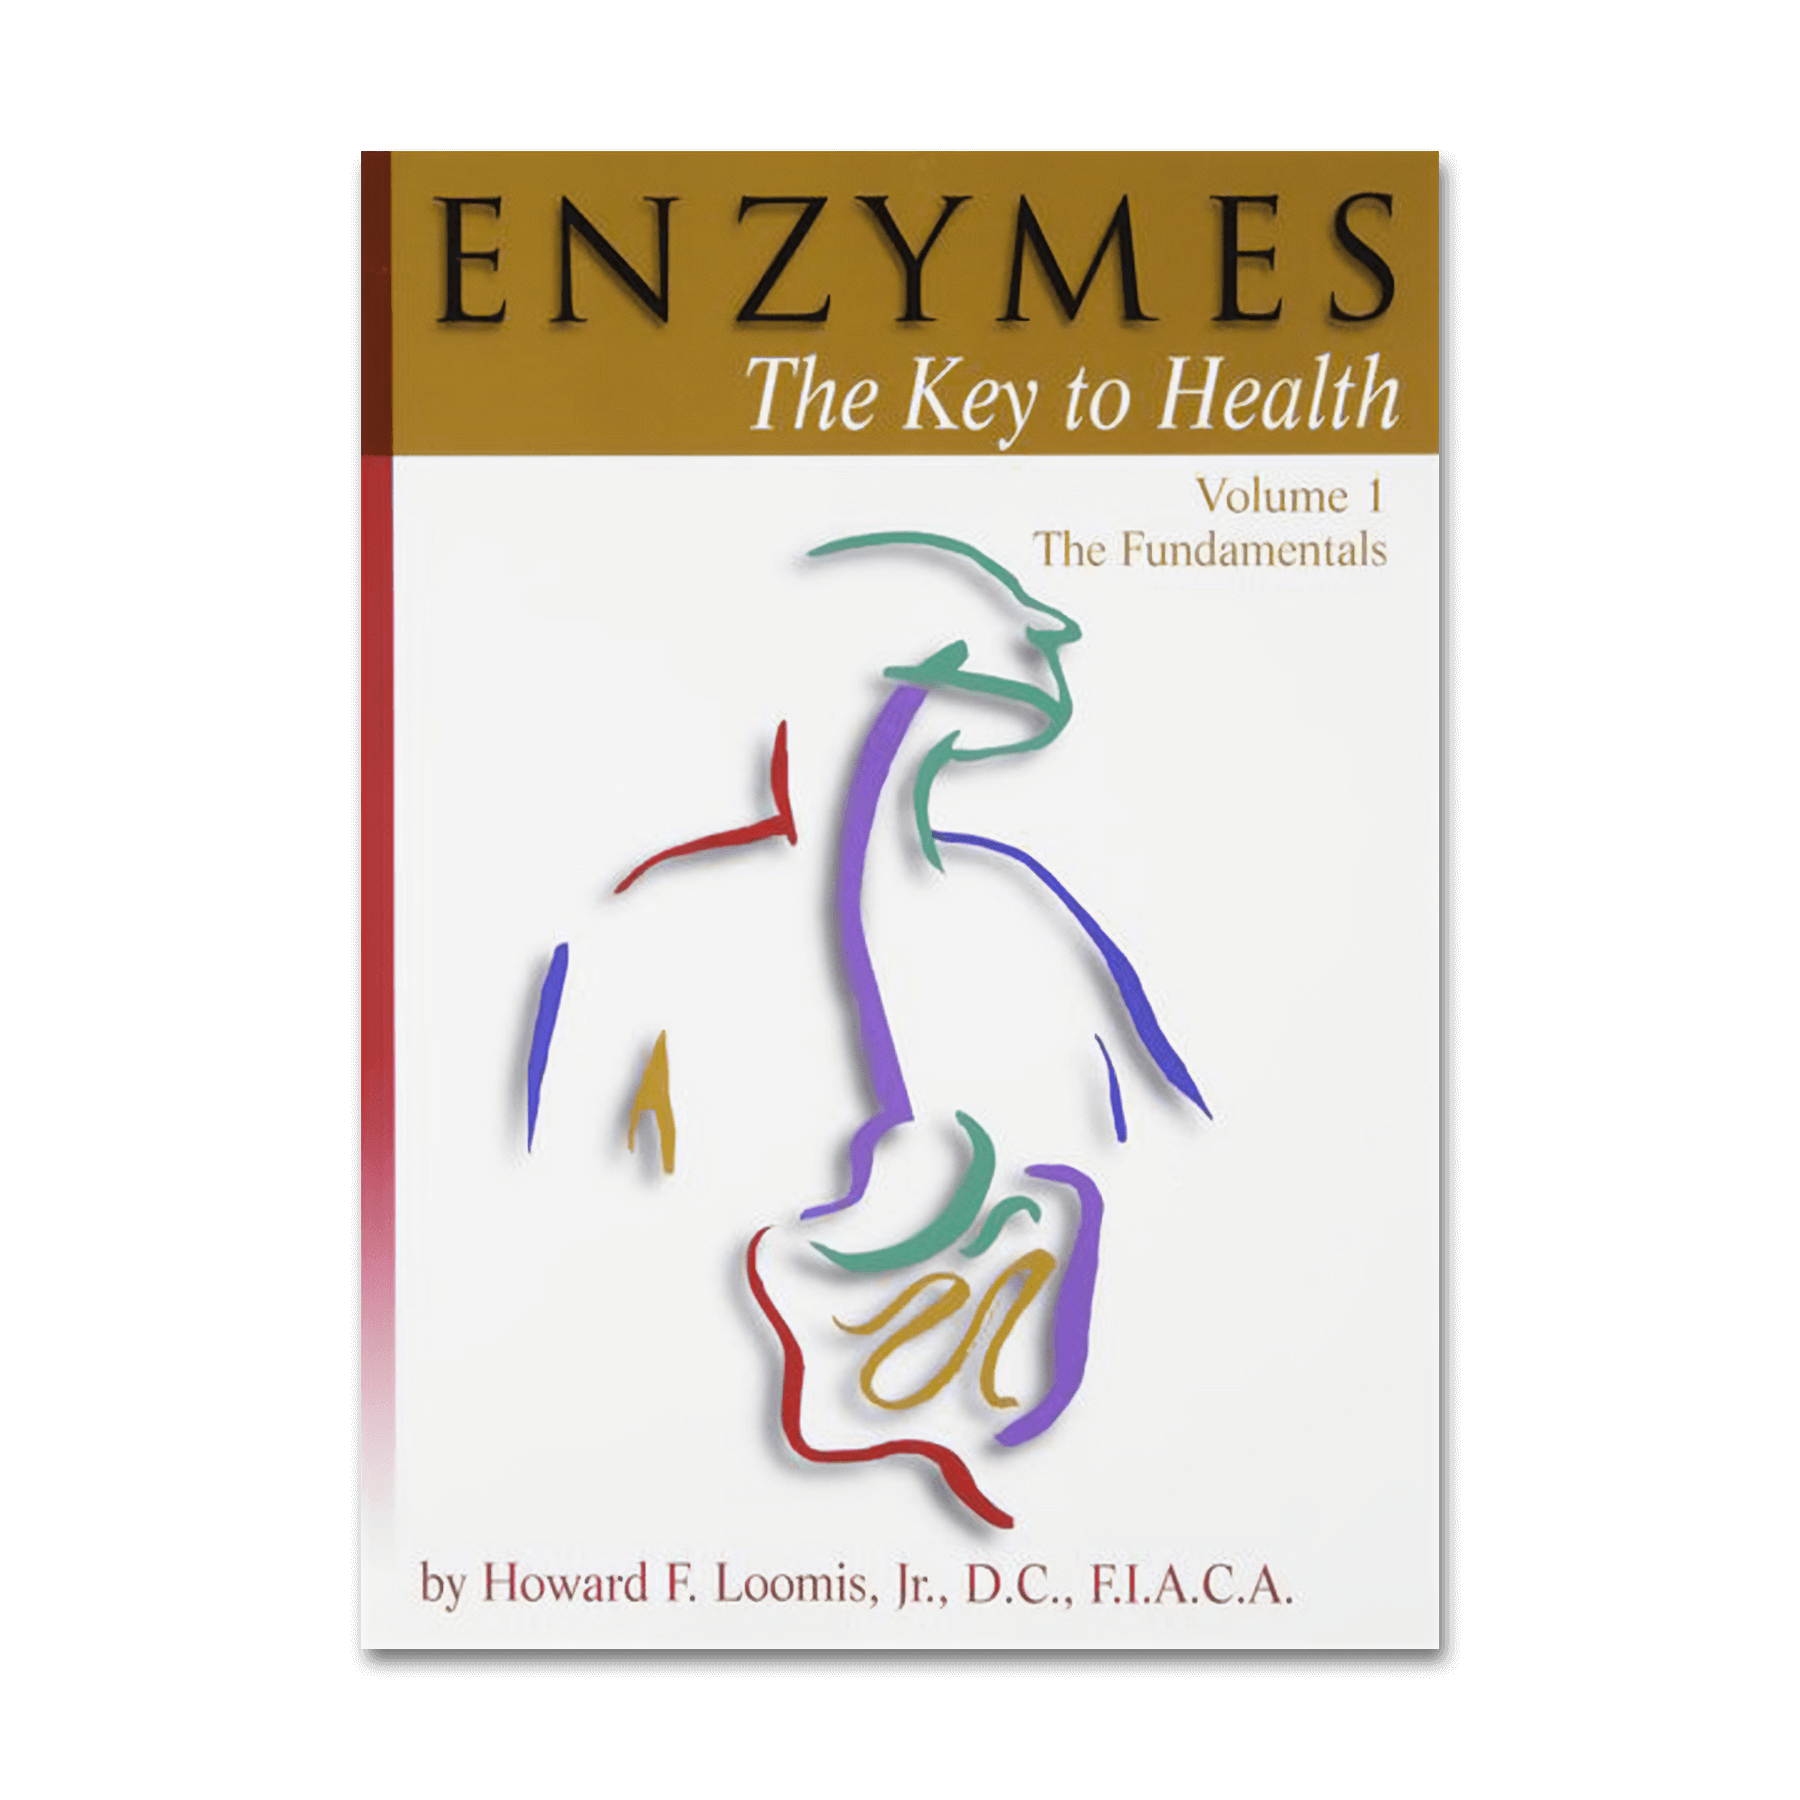 Enzymes: The Key to Health